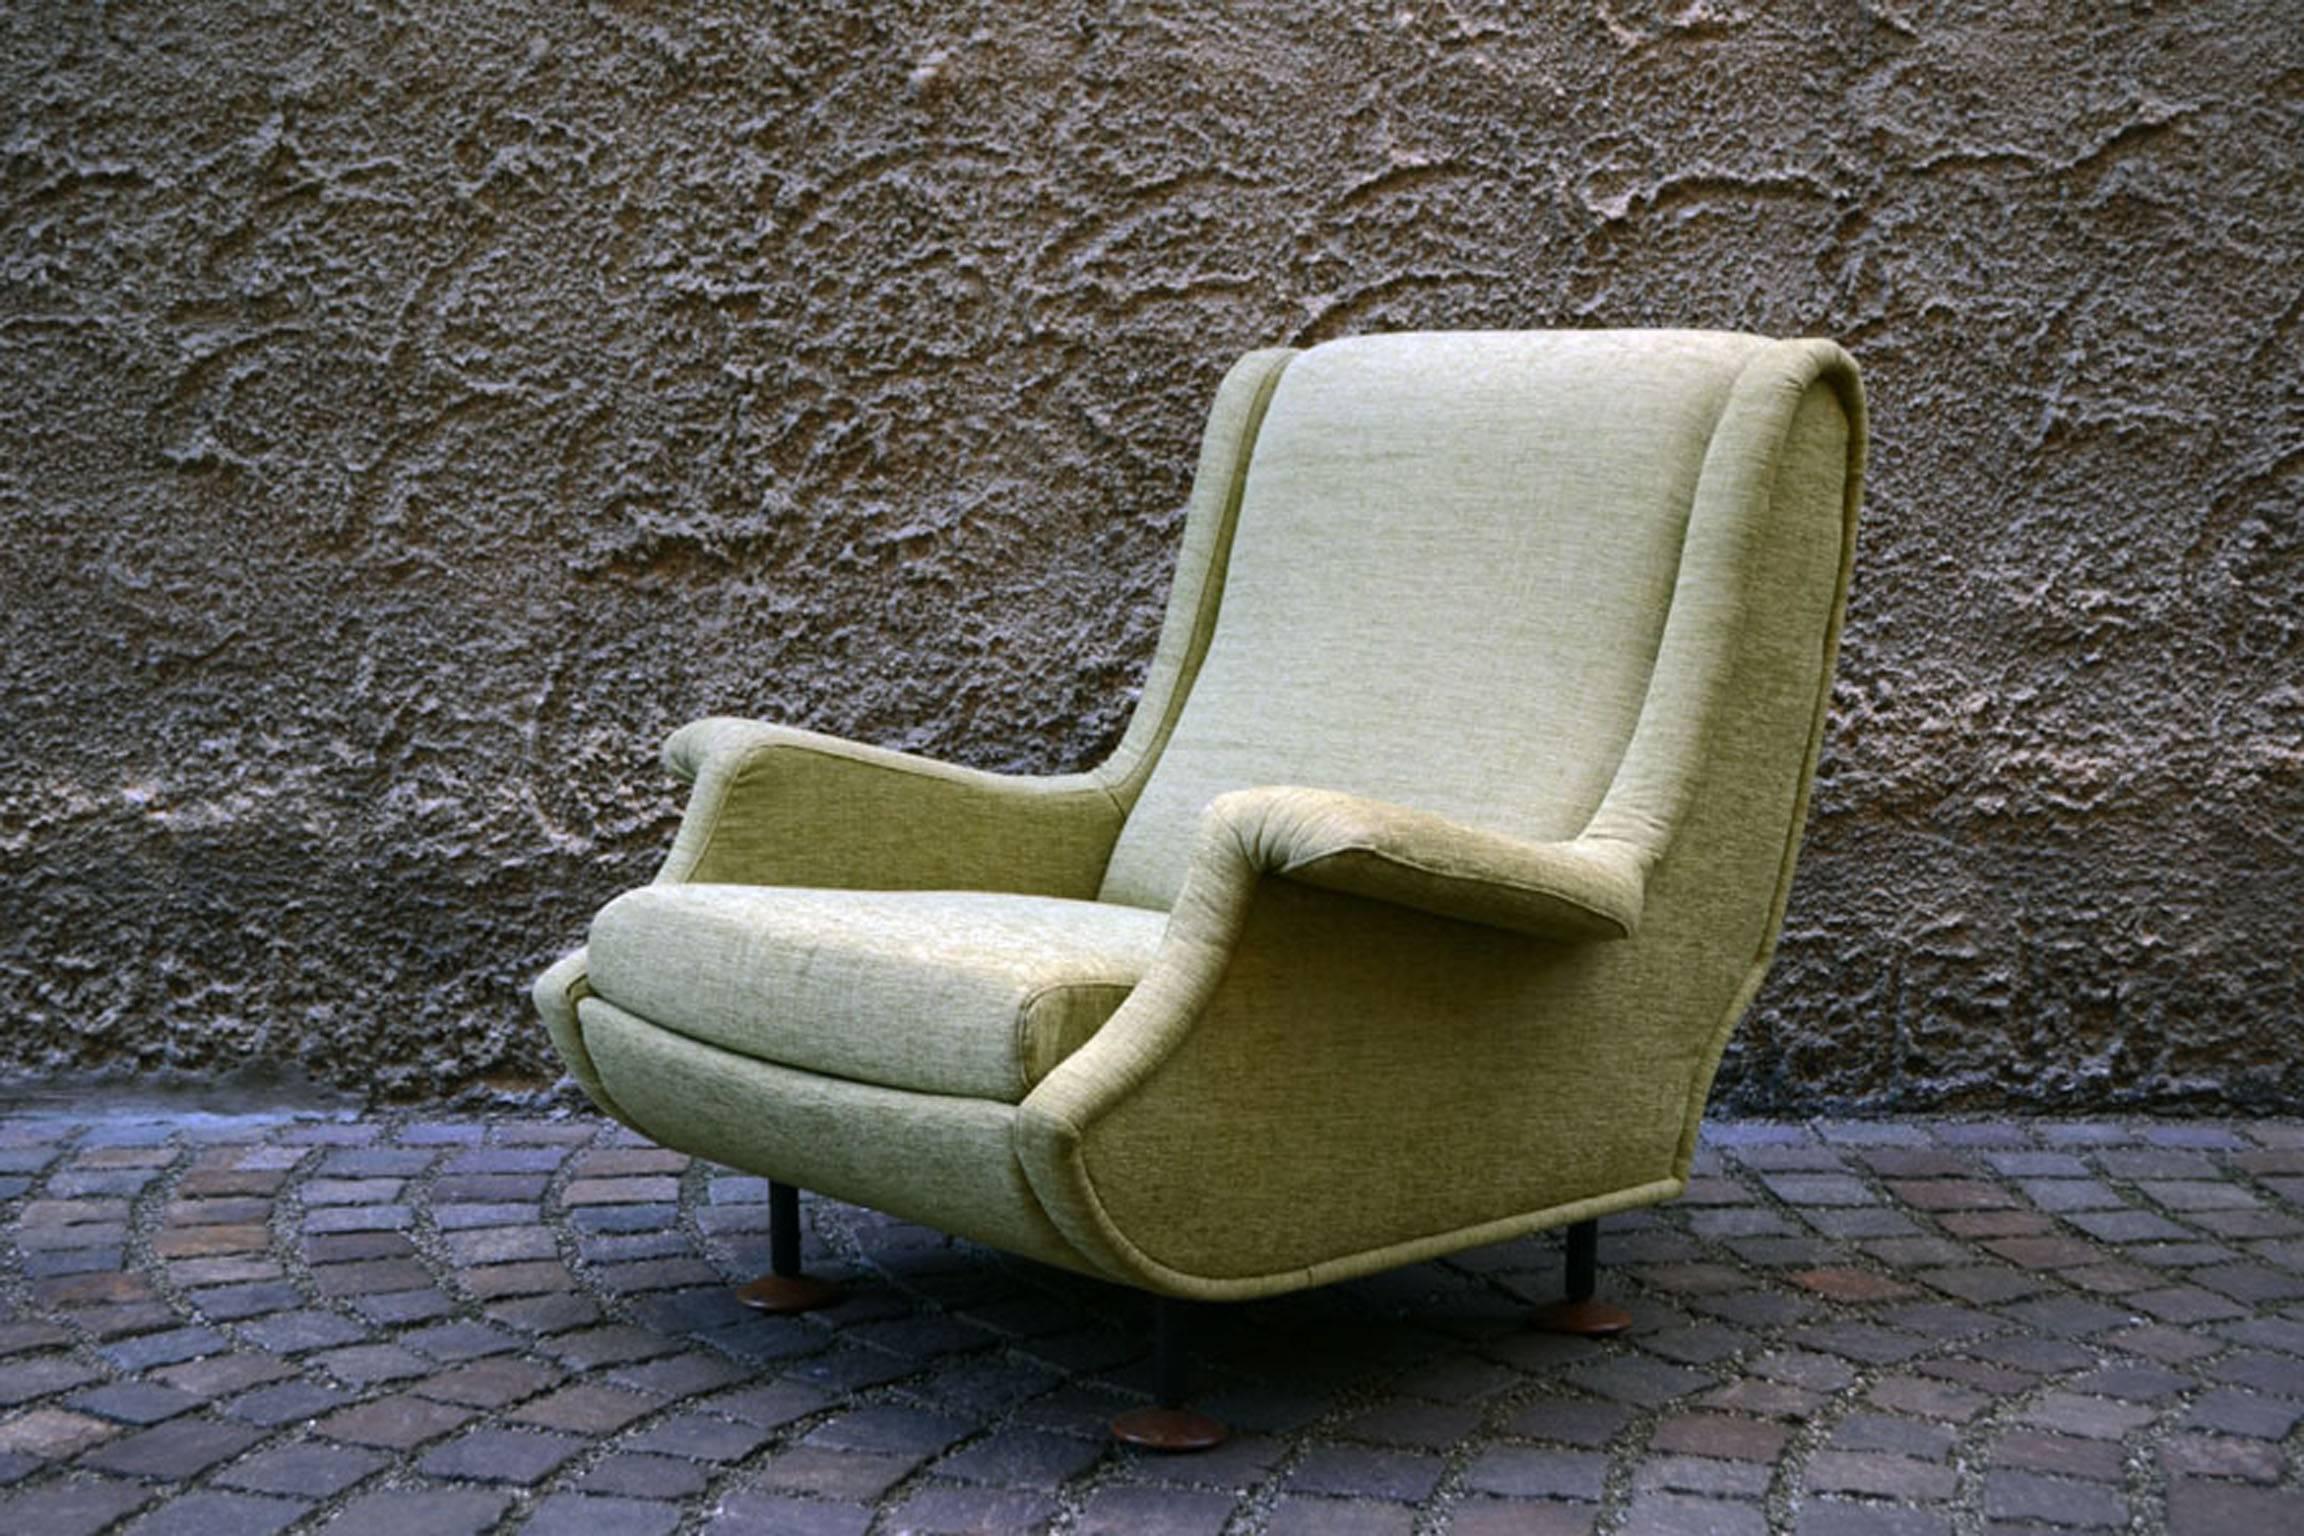 ‘Regent’ armchair design Marco Zanuso for Arflex, 1960s.
In fabric with feet in wood and metal.